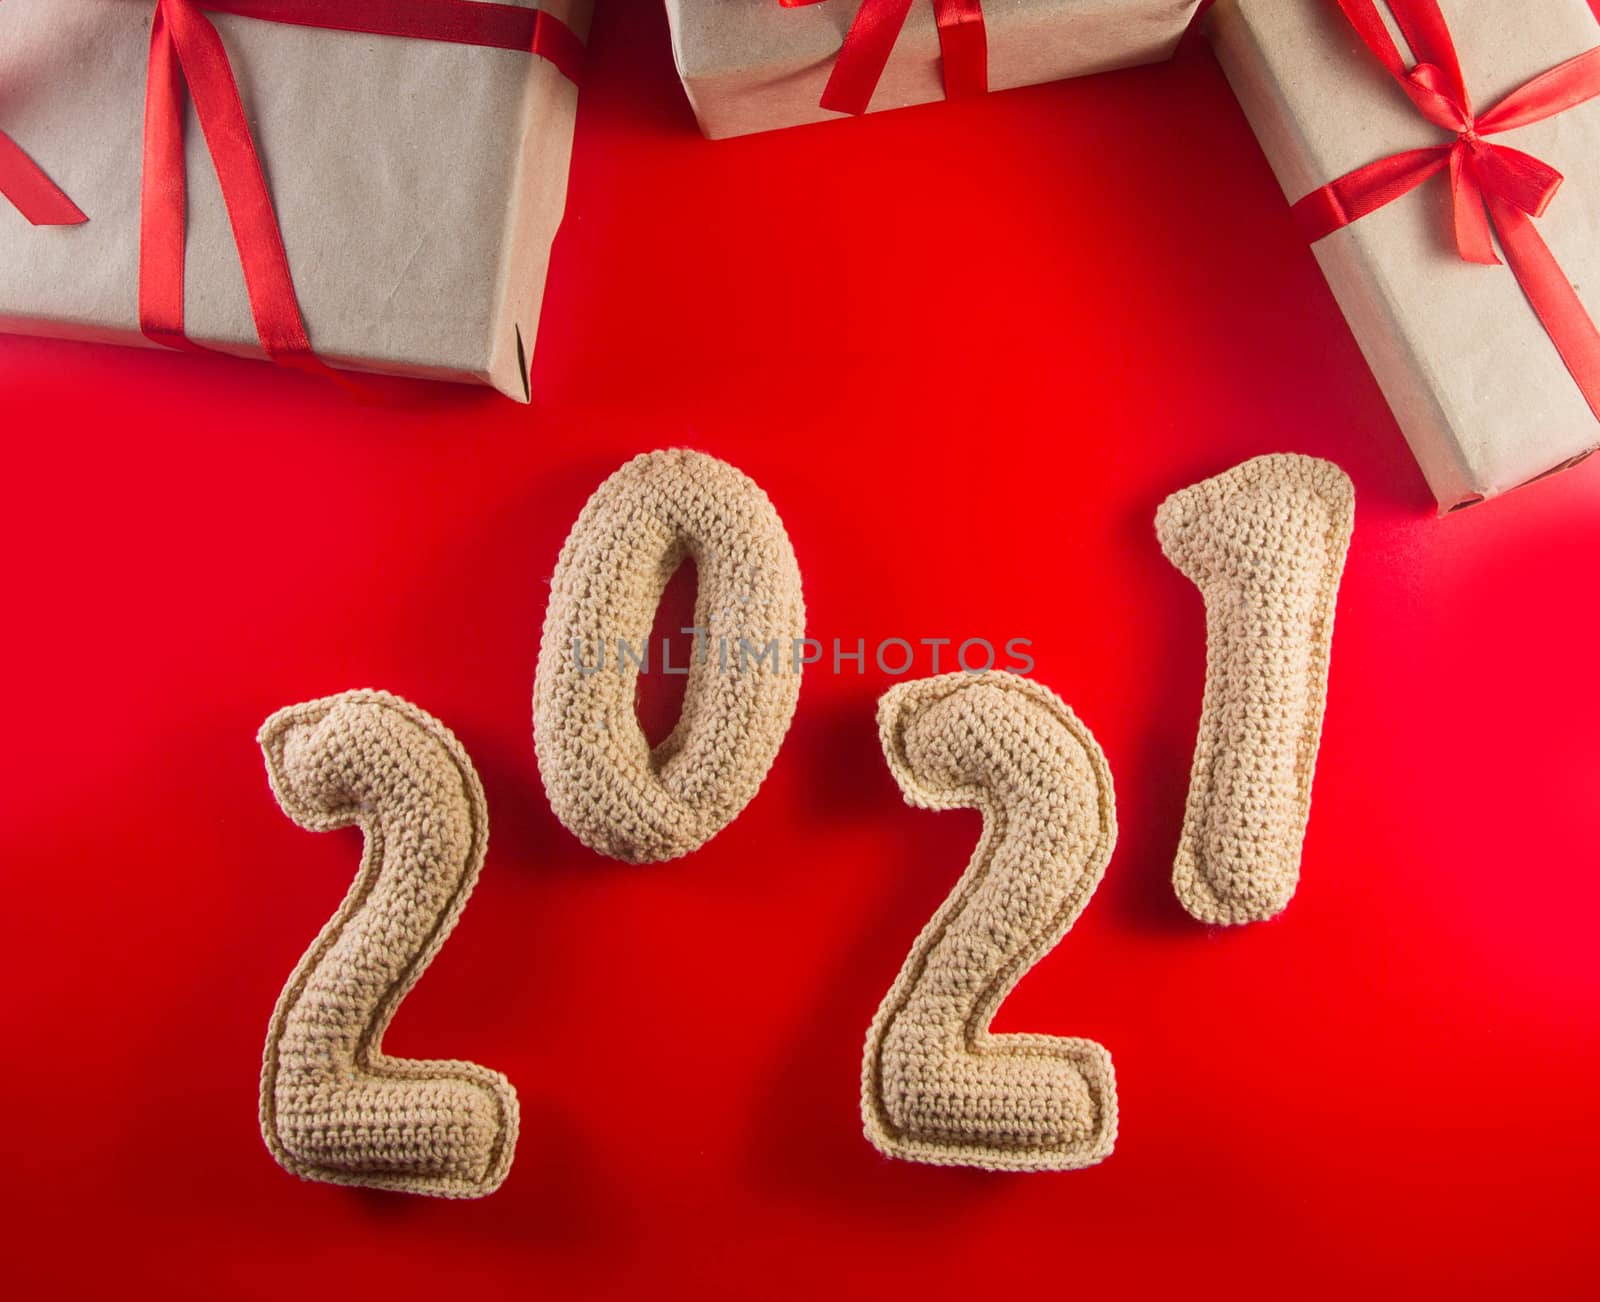 Christmas background with chroched 2021 number and craft paper gift boxes with red ribbons